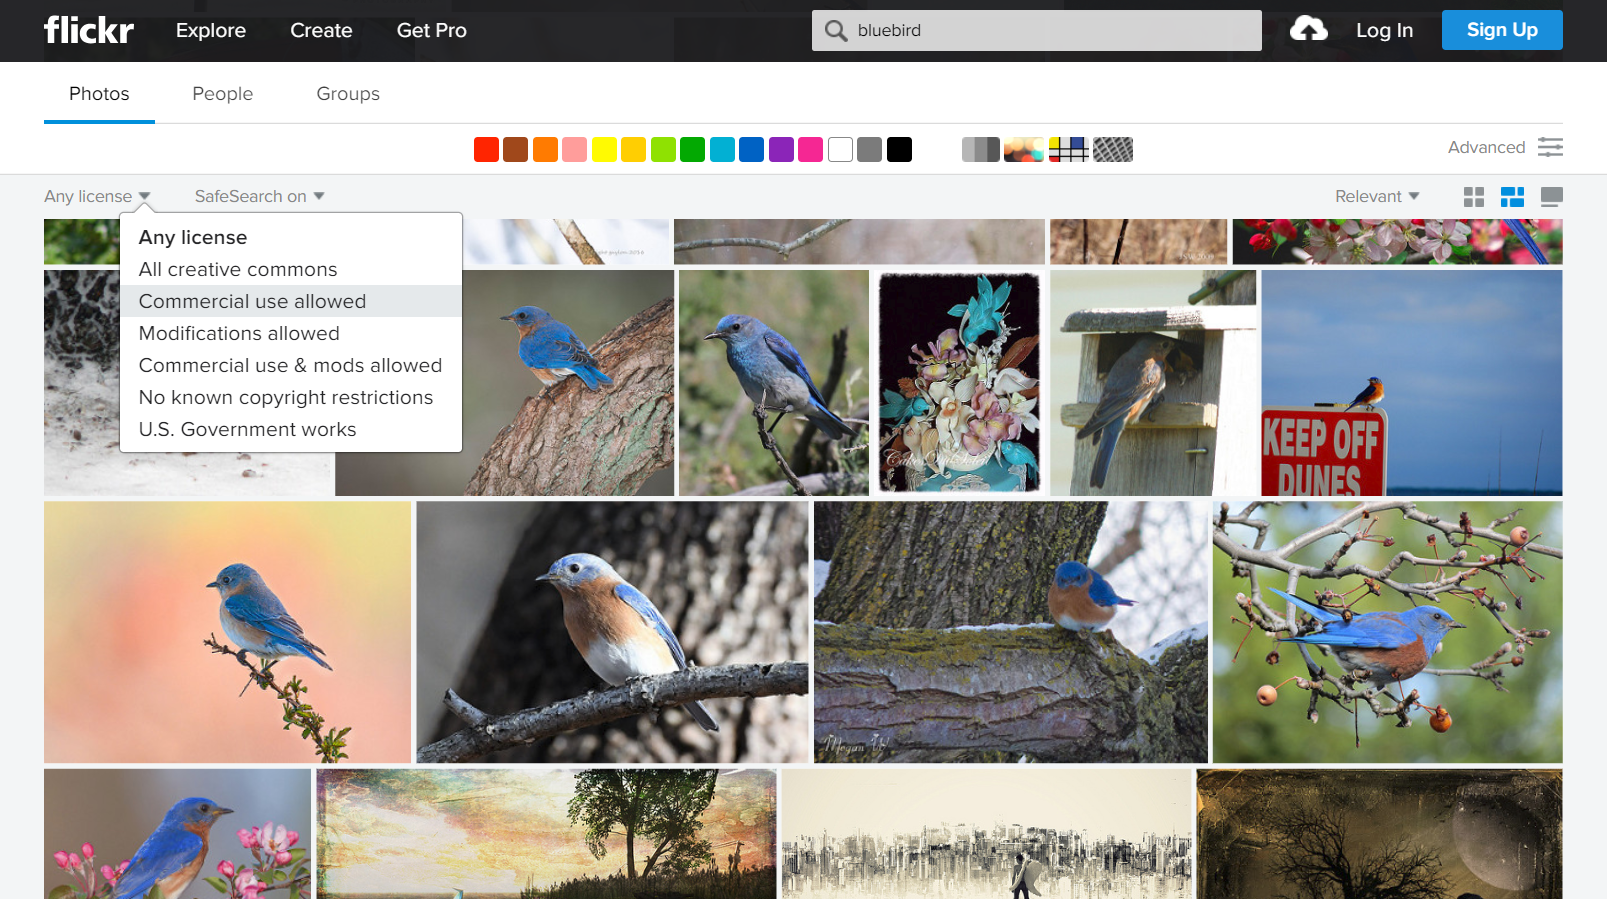 The 10 Best Image Search Engines